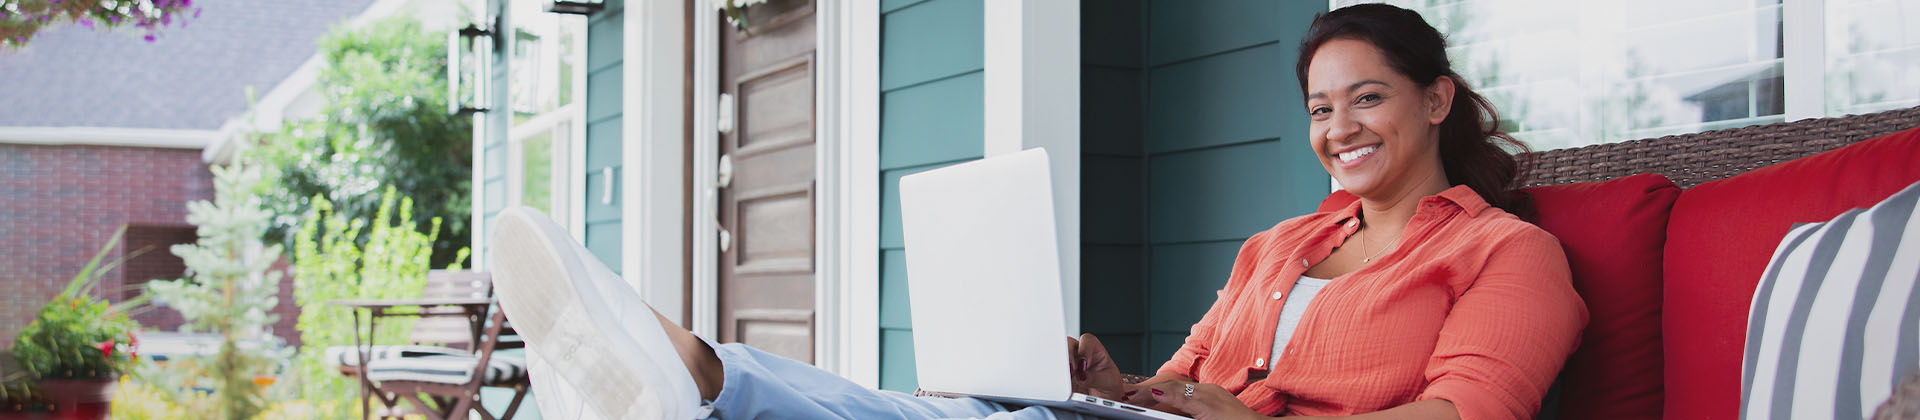 Woman with hair tied back sits on a porch with a laptop computer